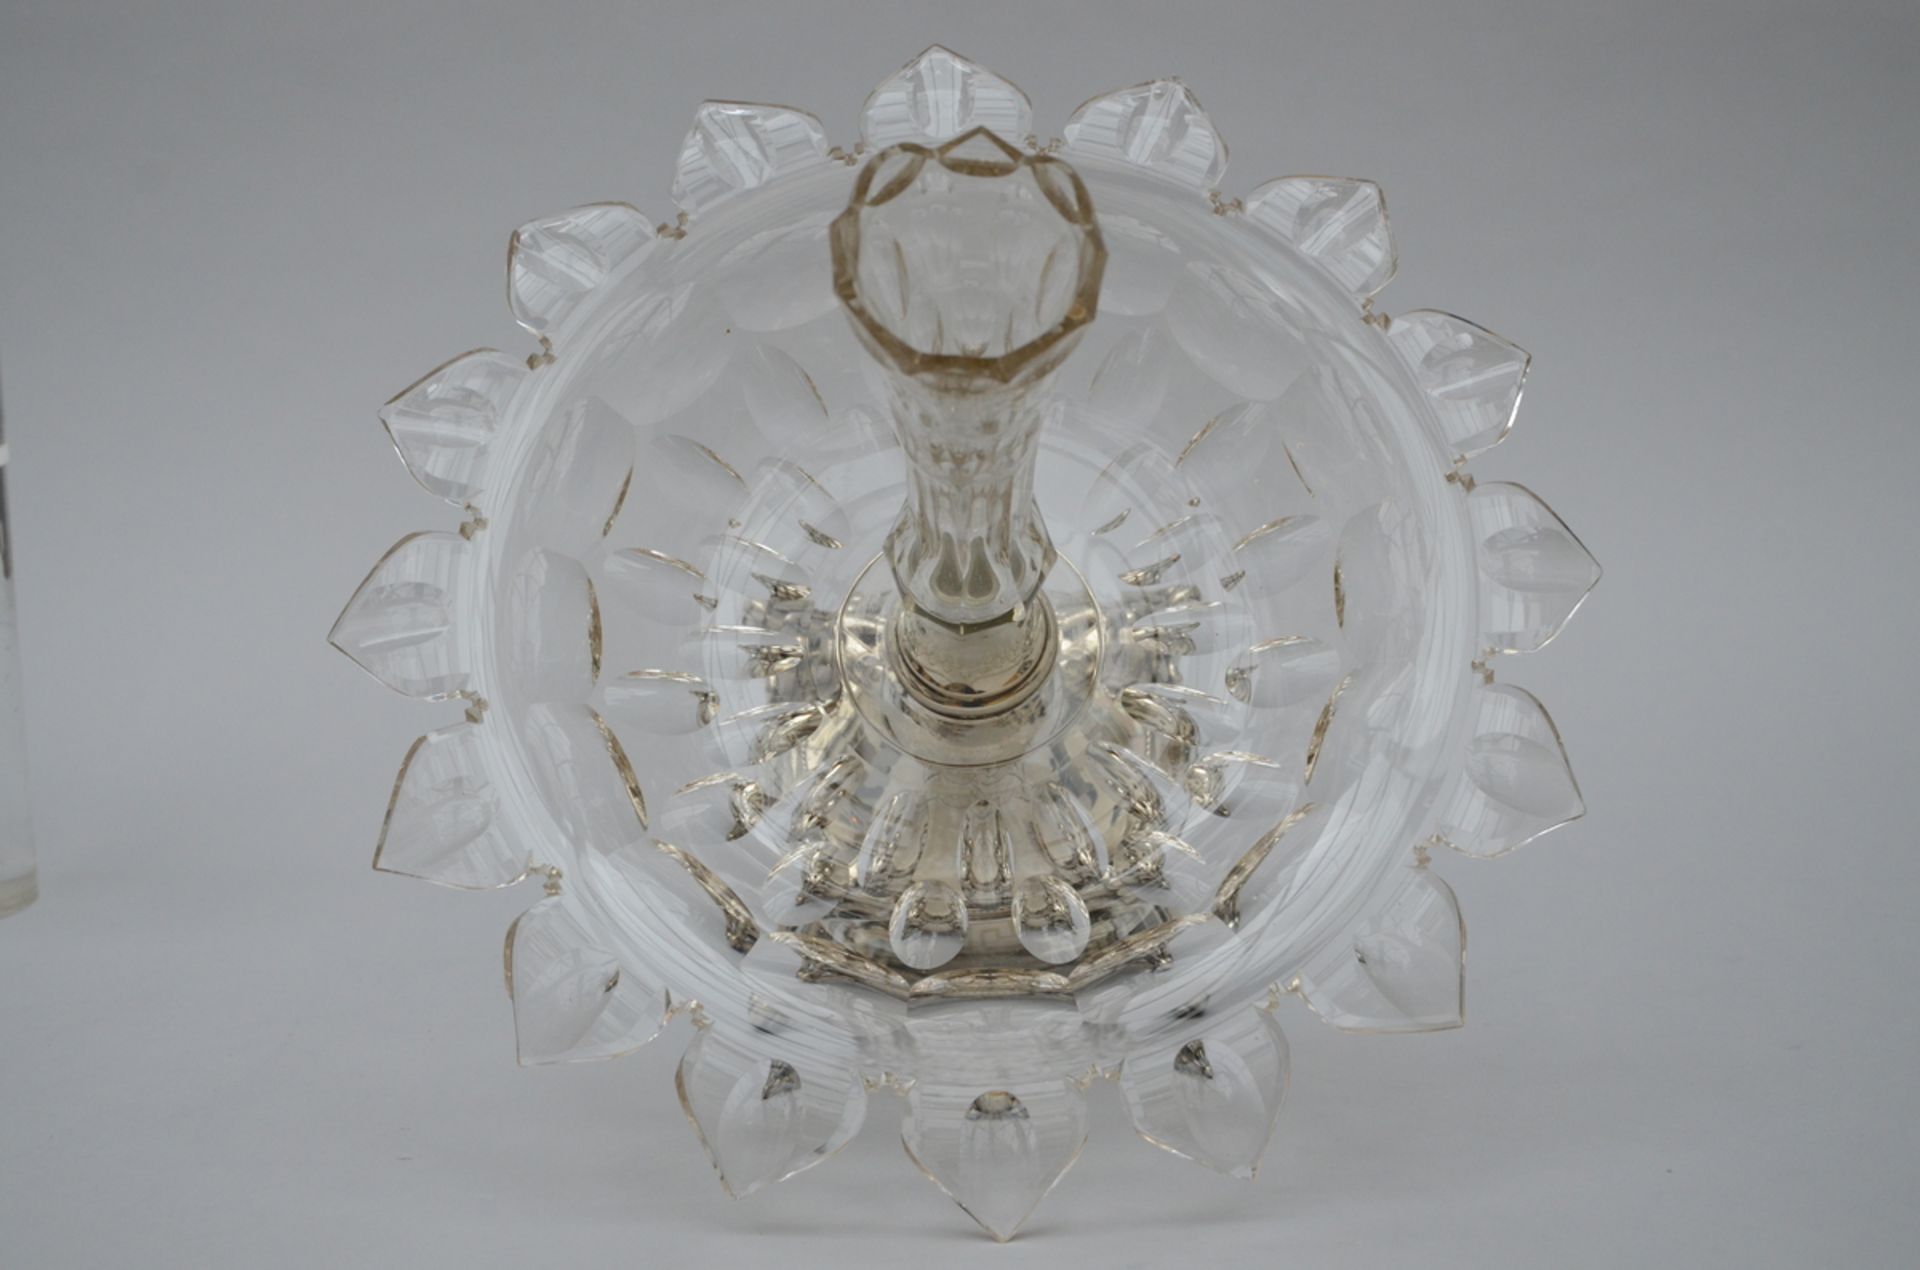 Flower vase in silver and crystal, Louis-Philippe (46x40cm) (*) - Image 3 of 6